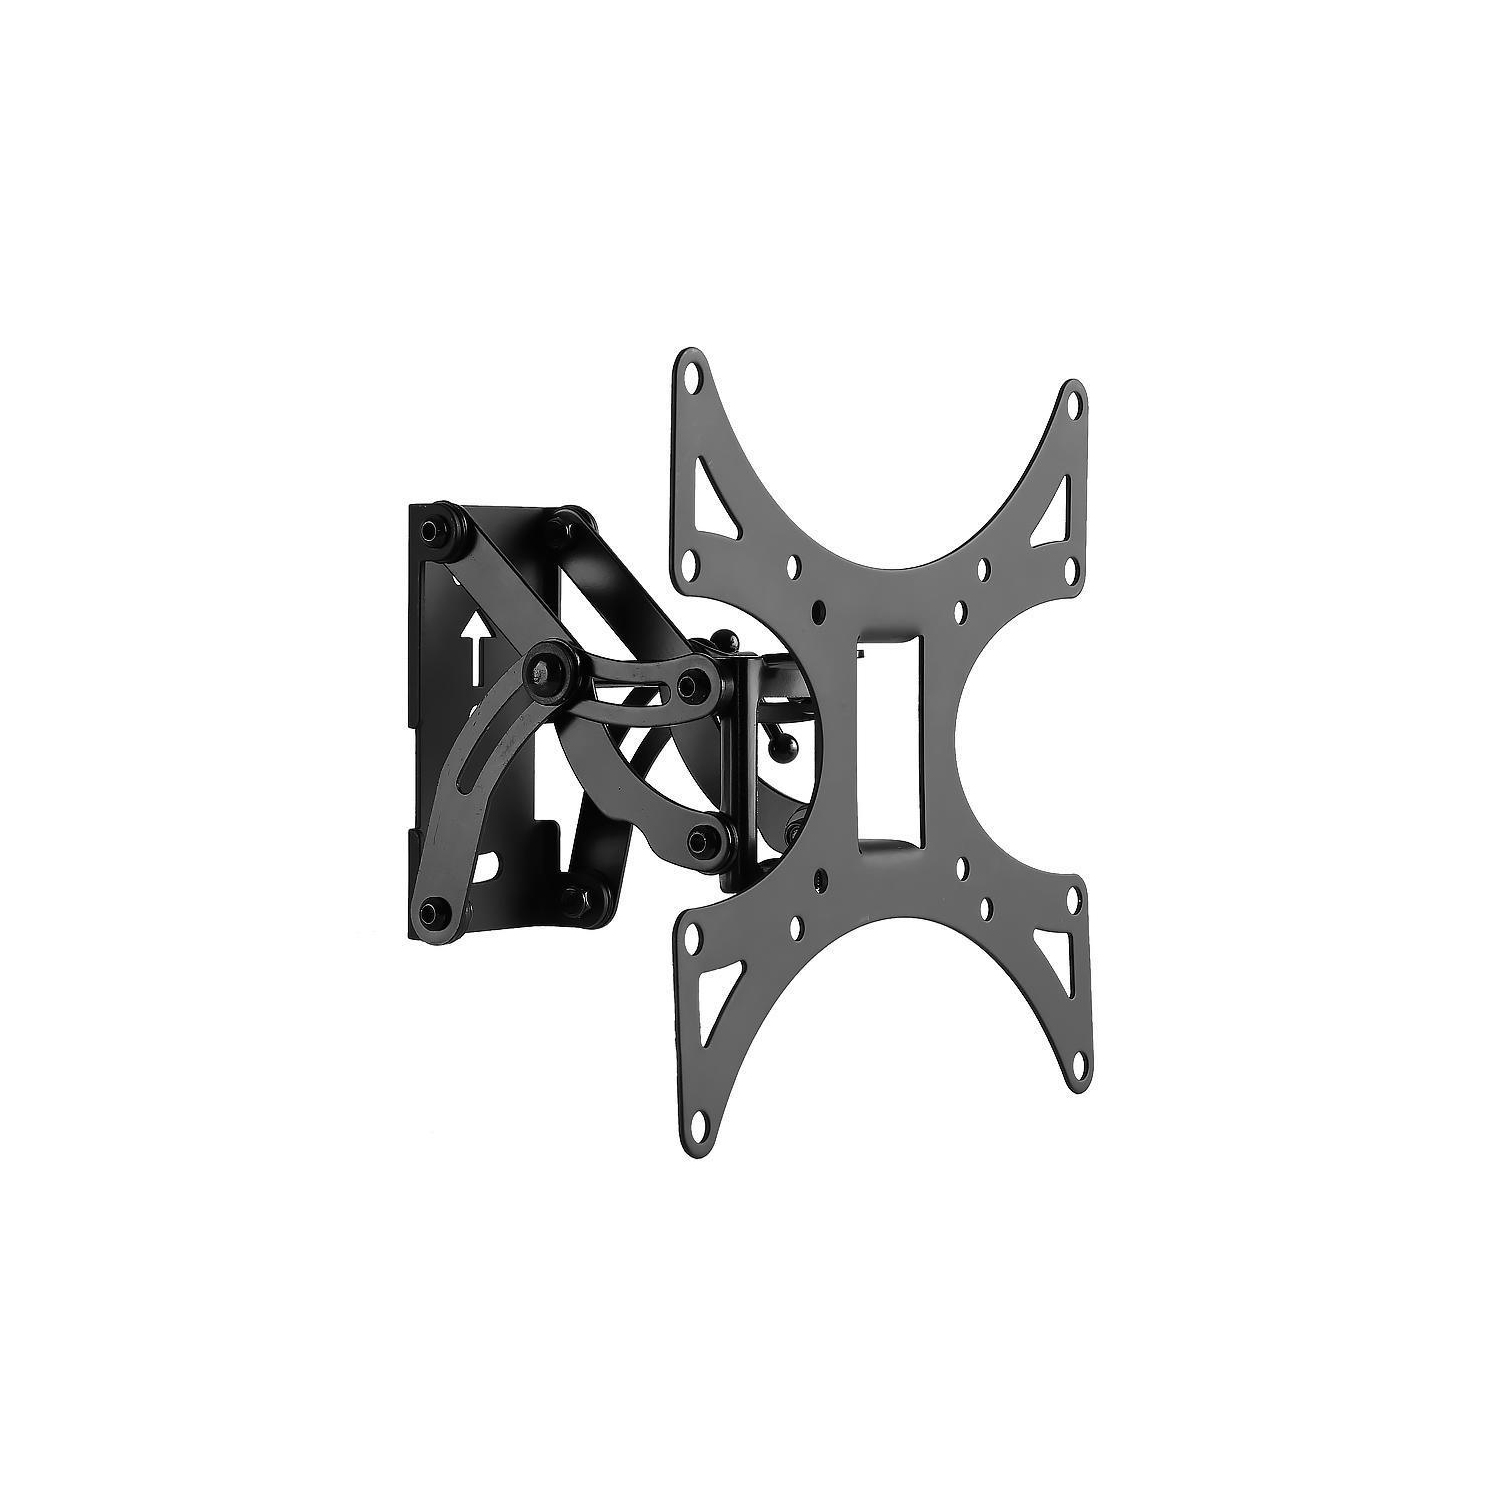 HFGrey’s Classic Swivel and Tilt TV Wall Mount For 23"- 42" LED, LCD Flat Panel TVs up to 66lbs